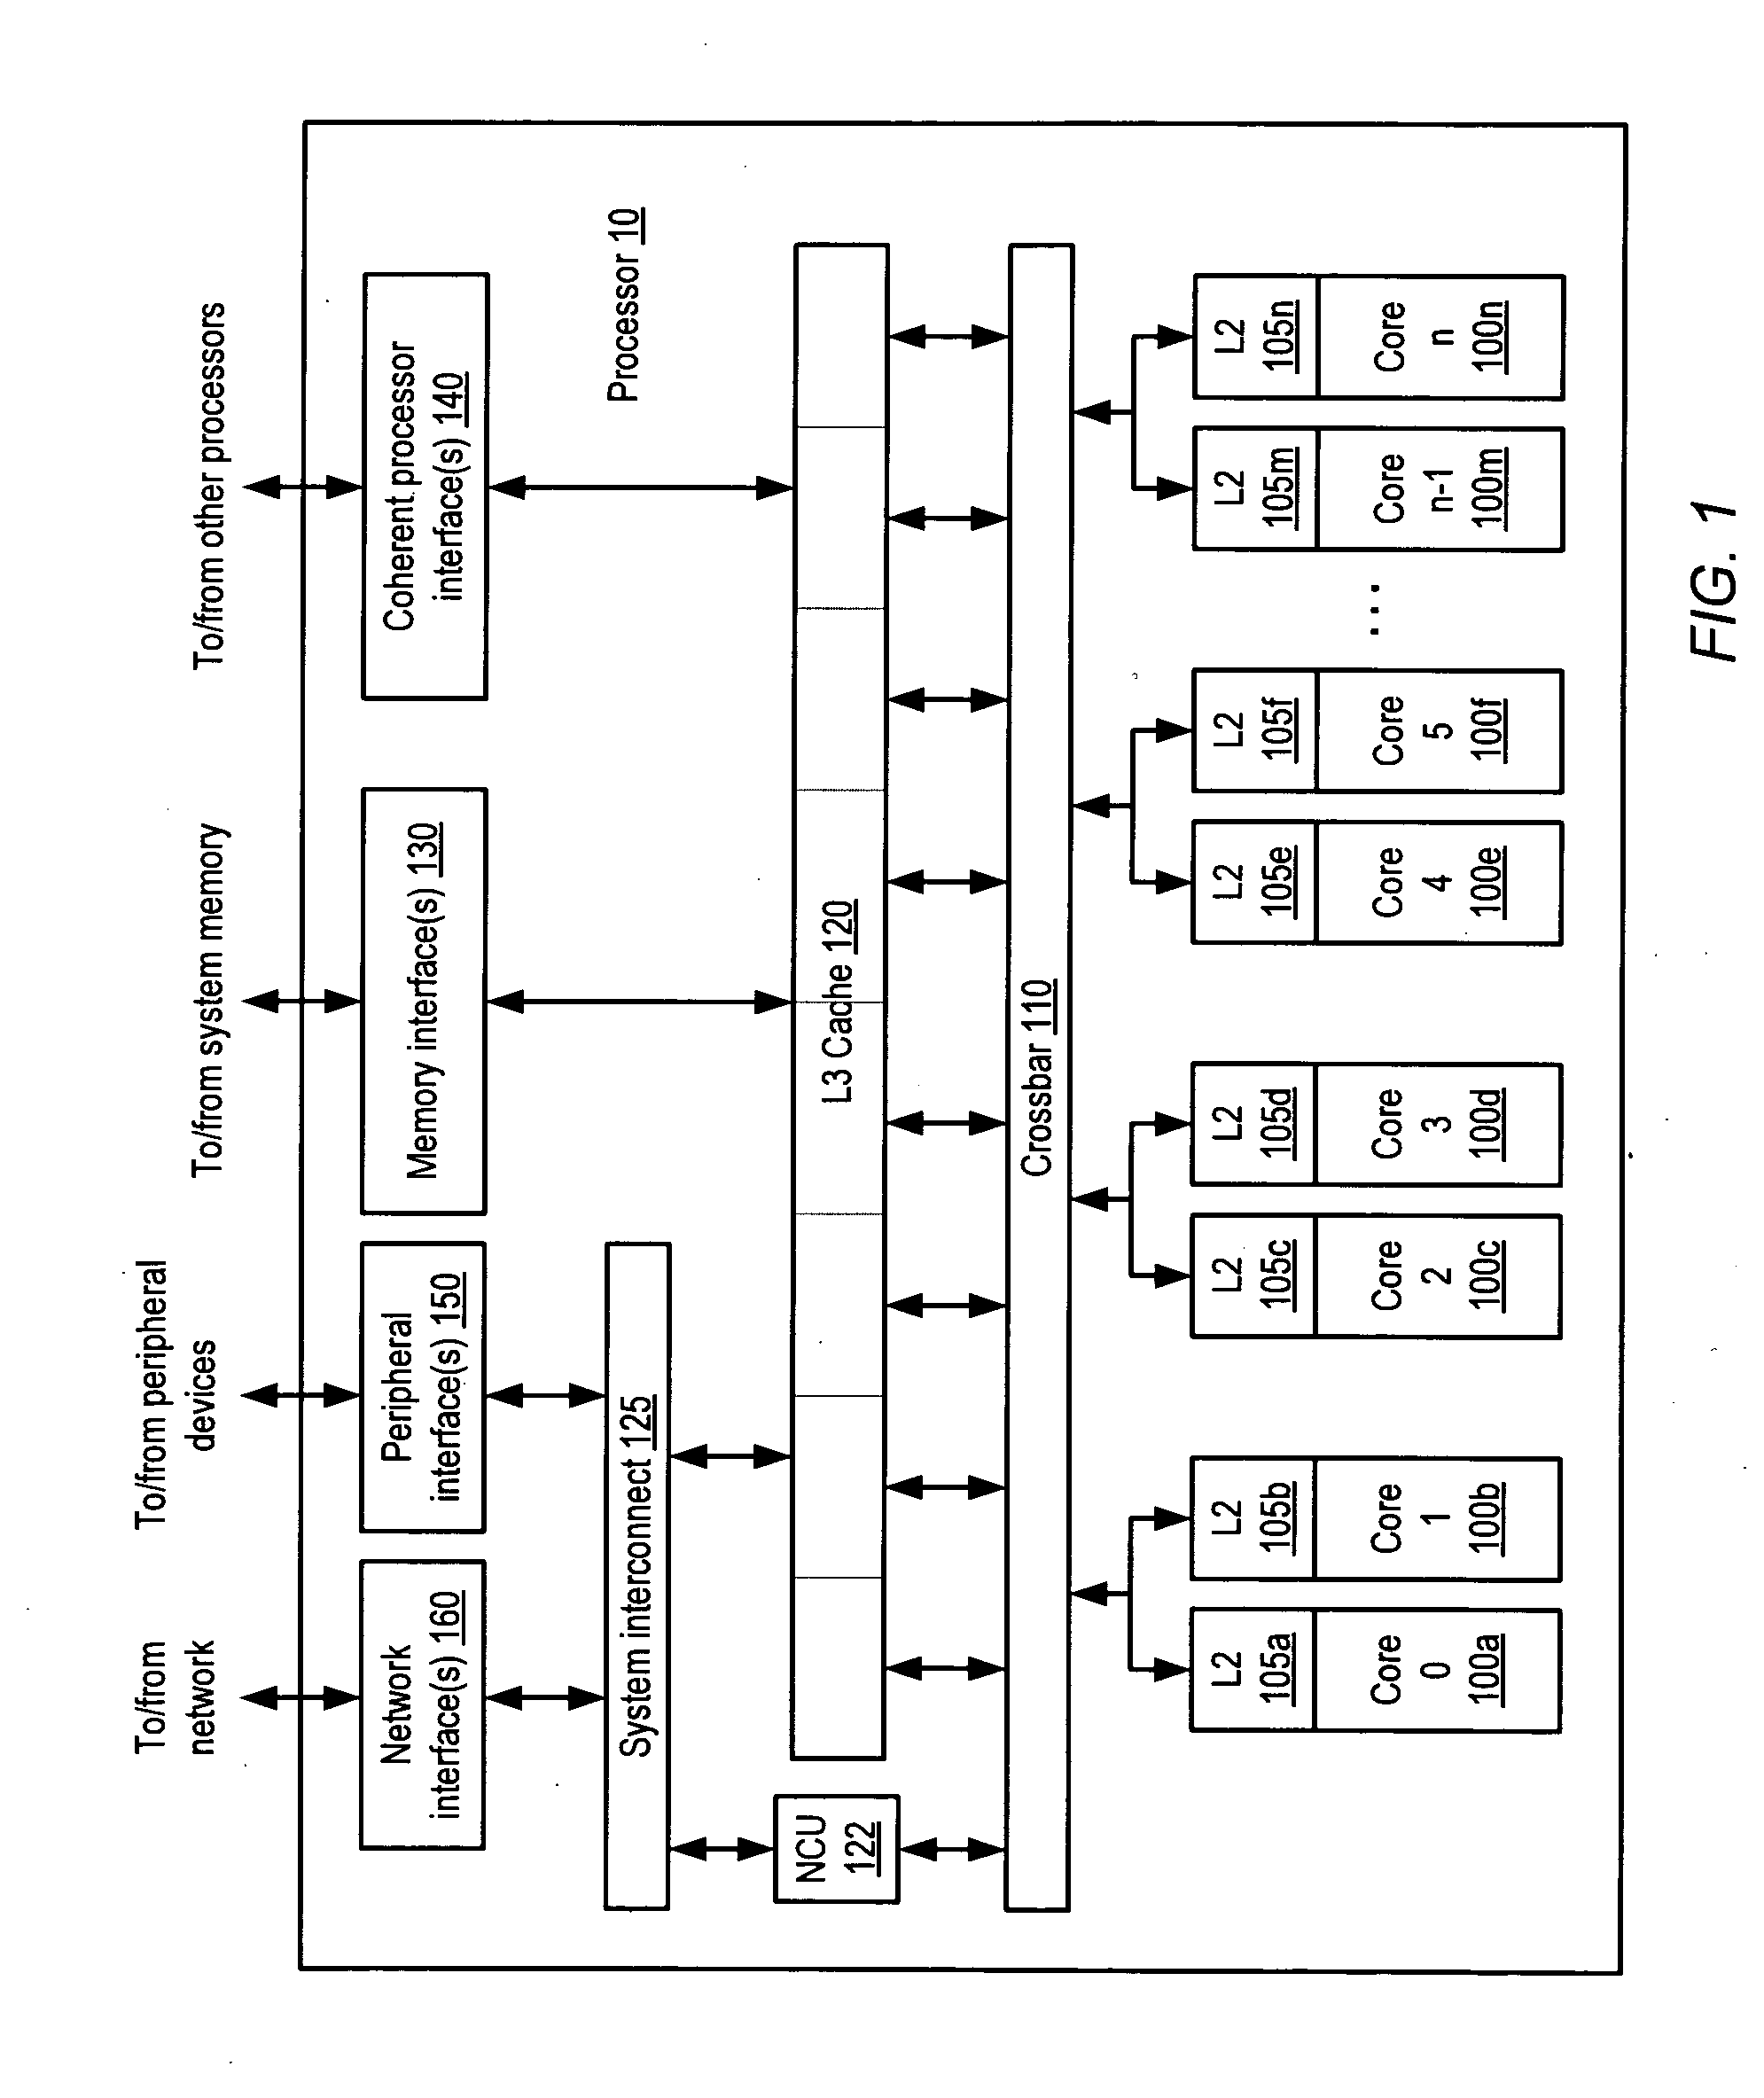 Apparatus and method for implementing instruction support for the camellia cipher algorithm